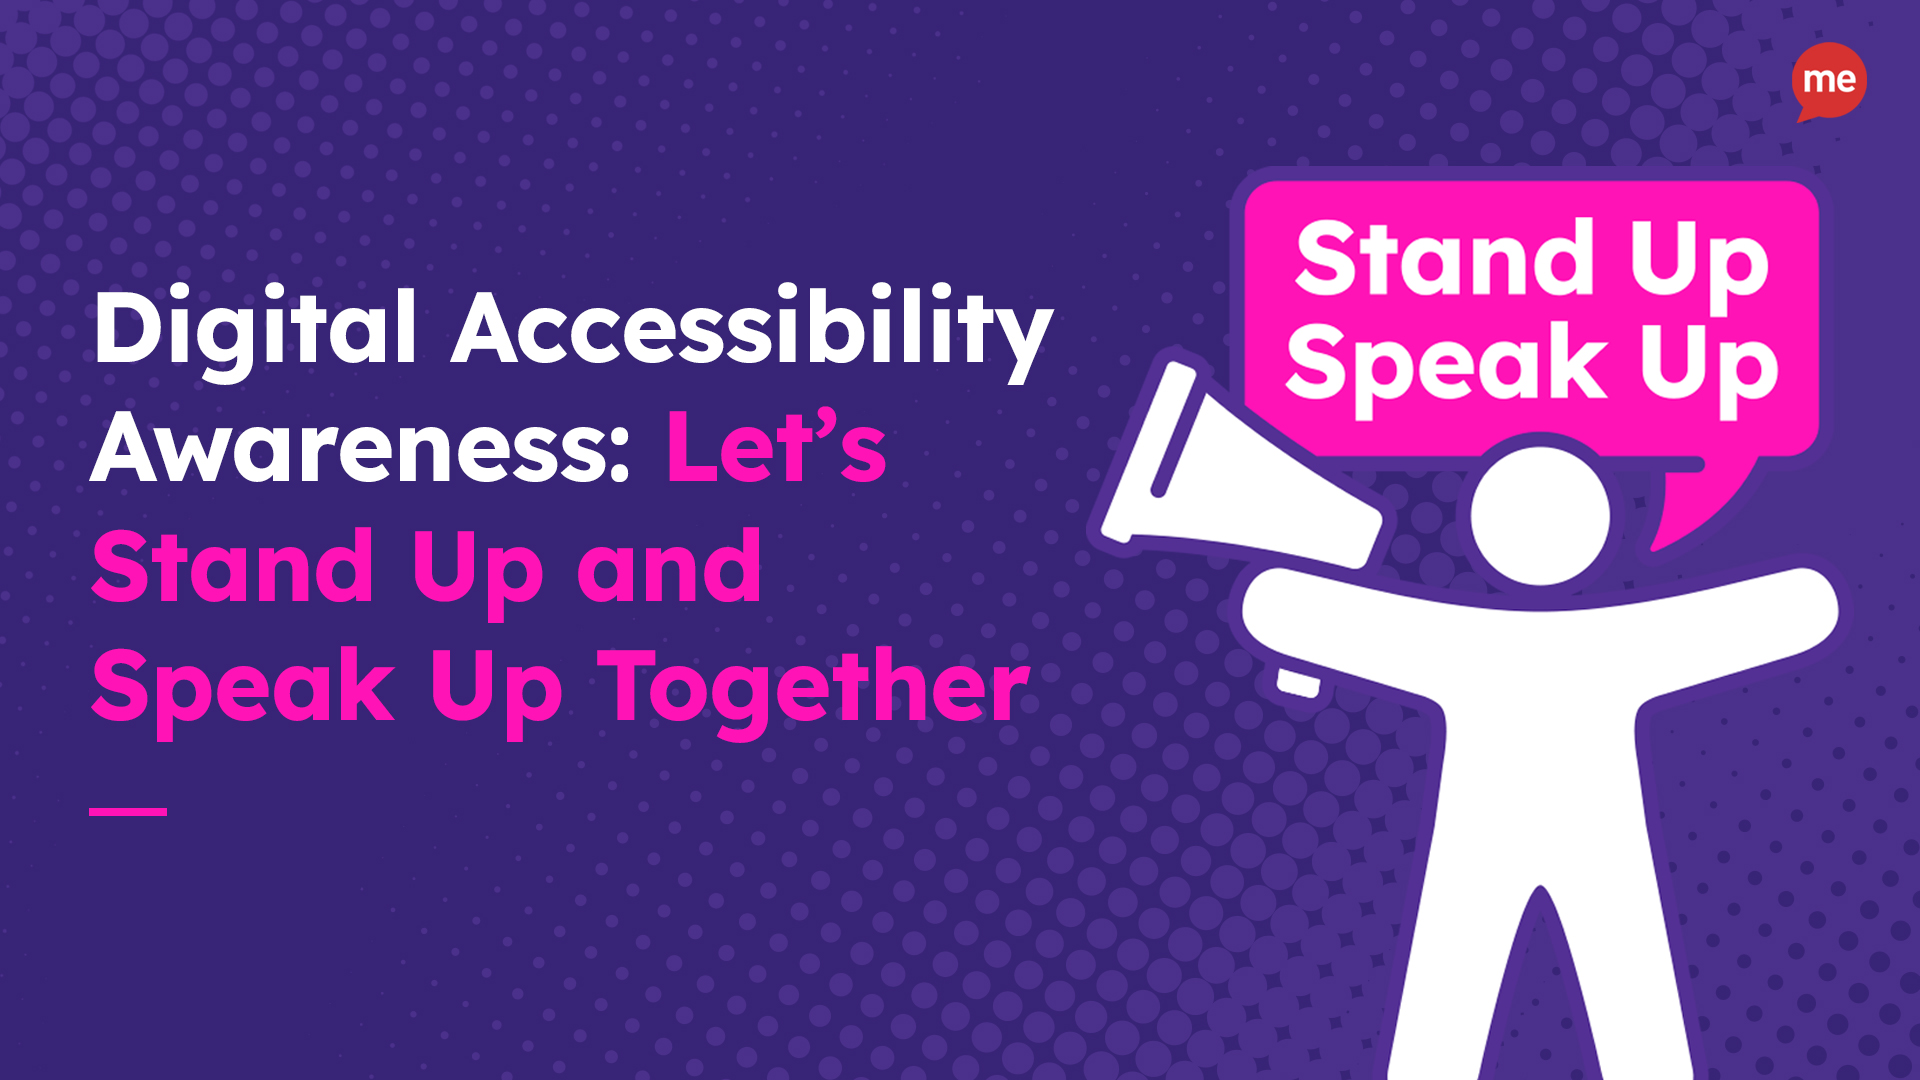 Digital Accessibility: Let's Stand Up and Speak Up Together